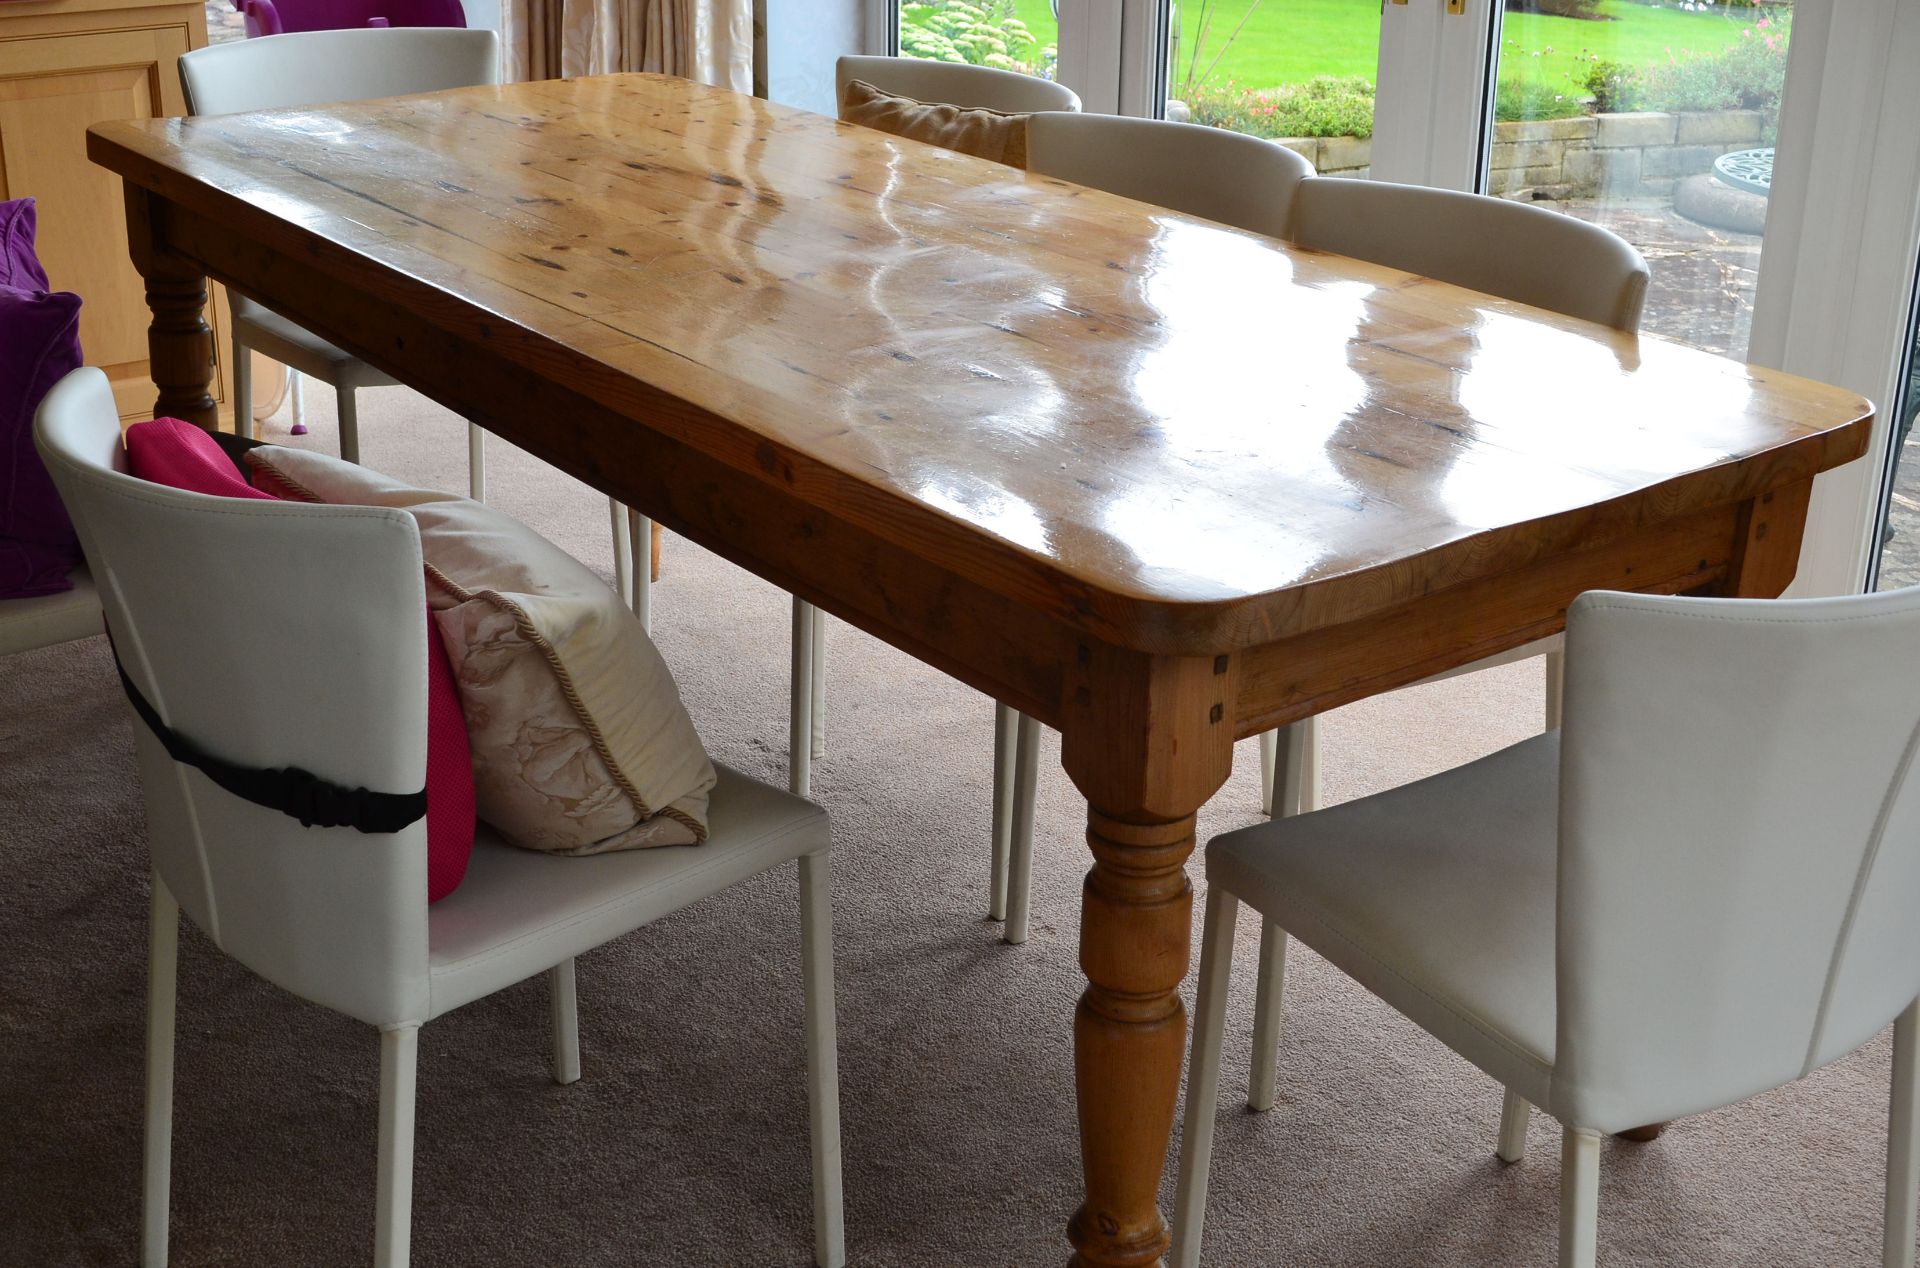 1 x Bespoke Pine Dining Table Made From Reclaimed Church Pews - CL226 - Location: Knutsford WA16 - Image 2 of 9